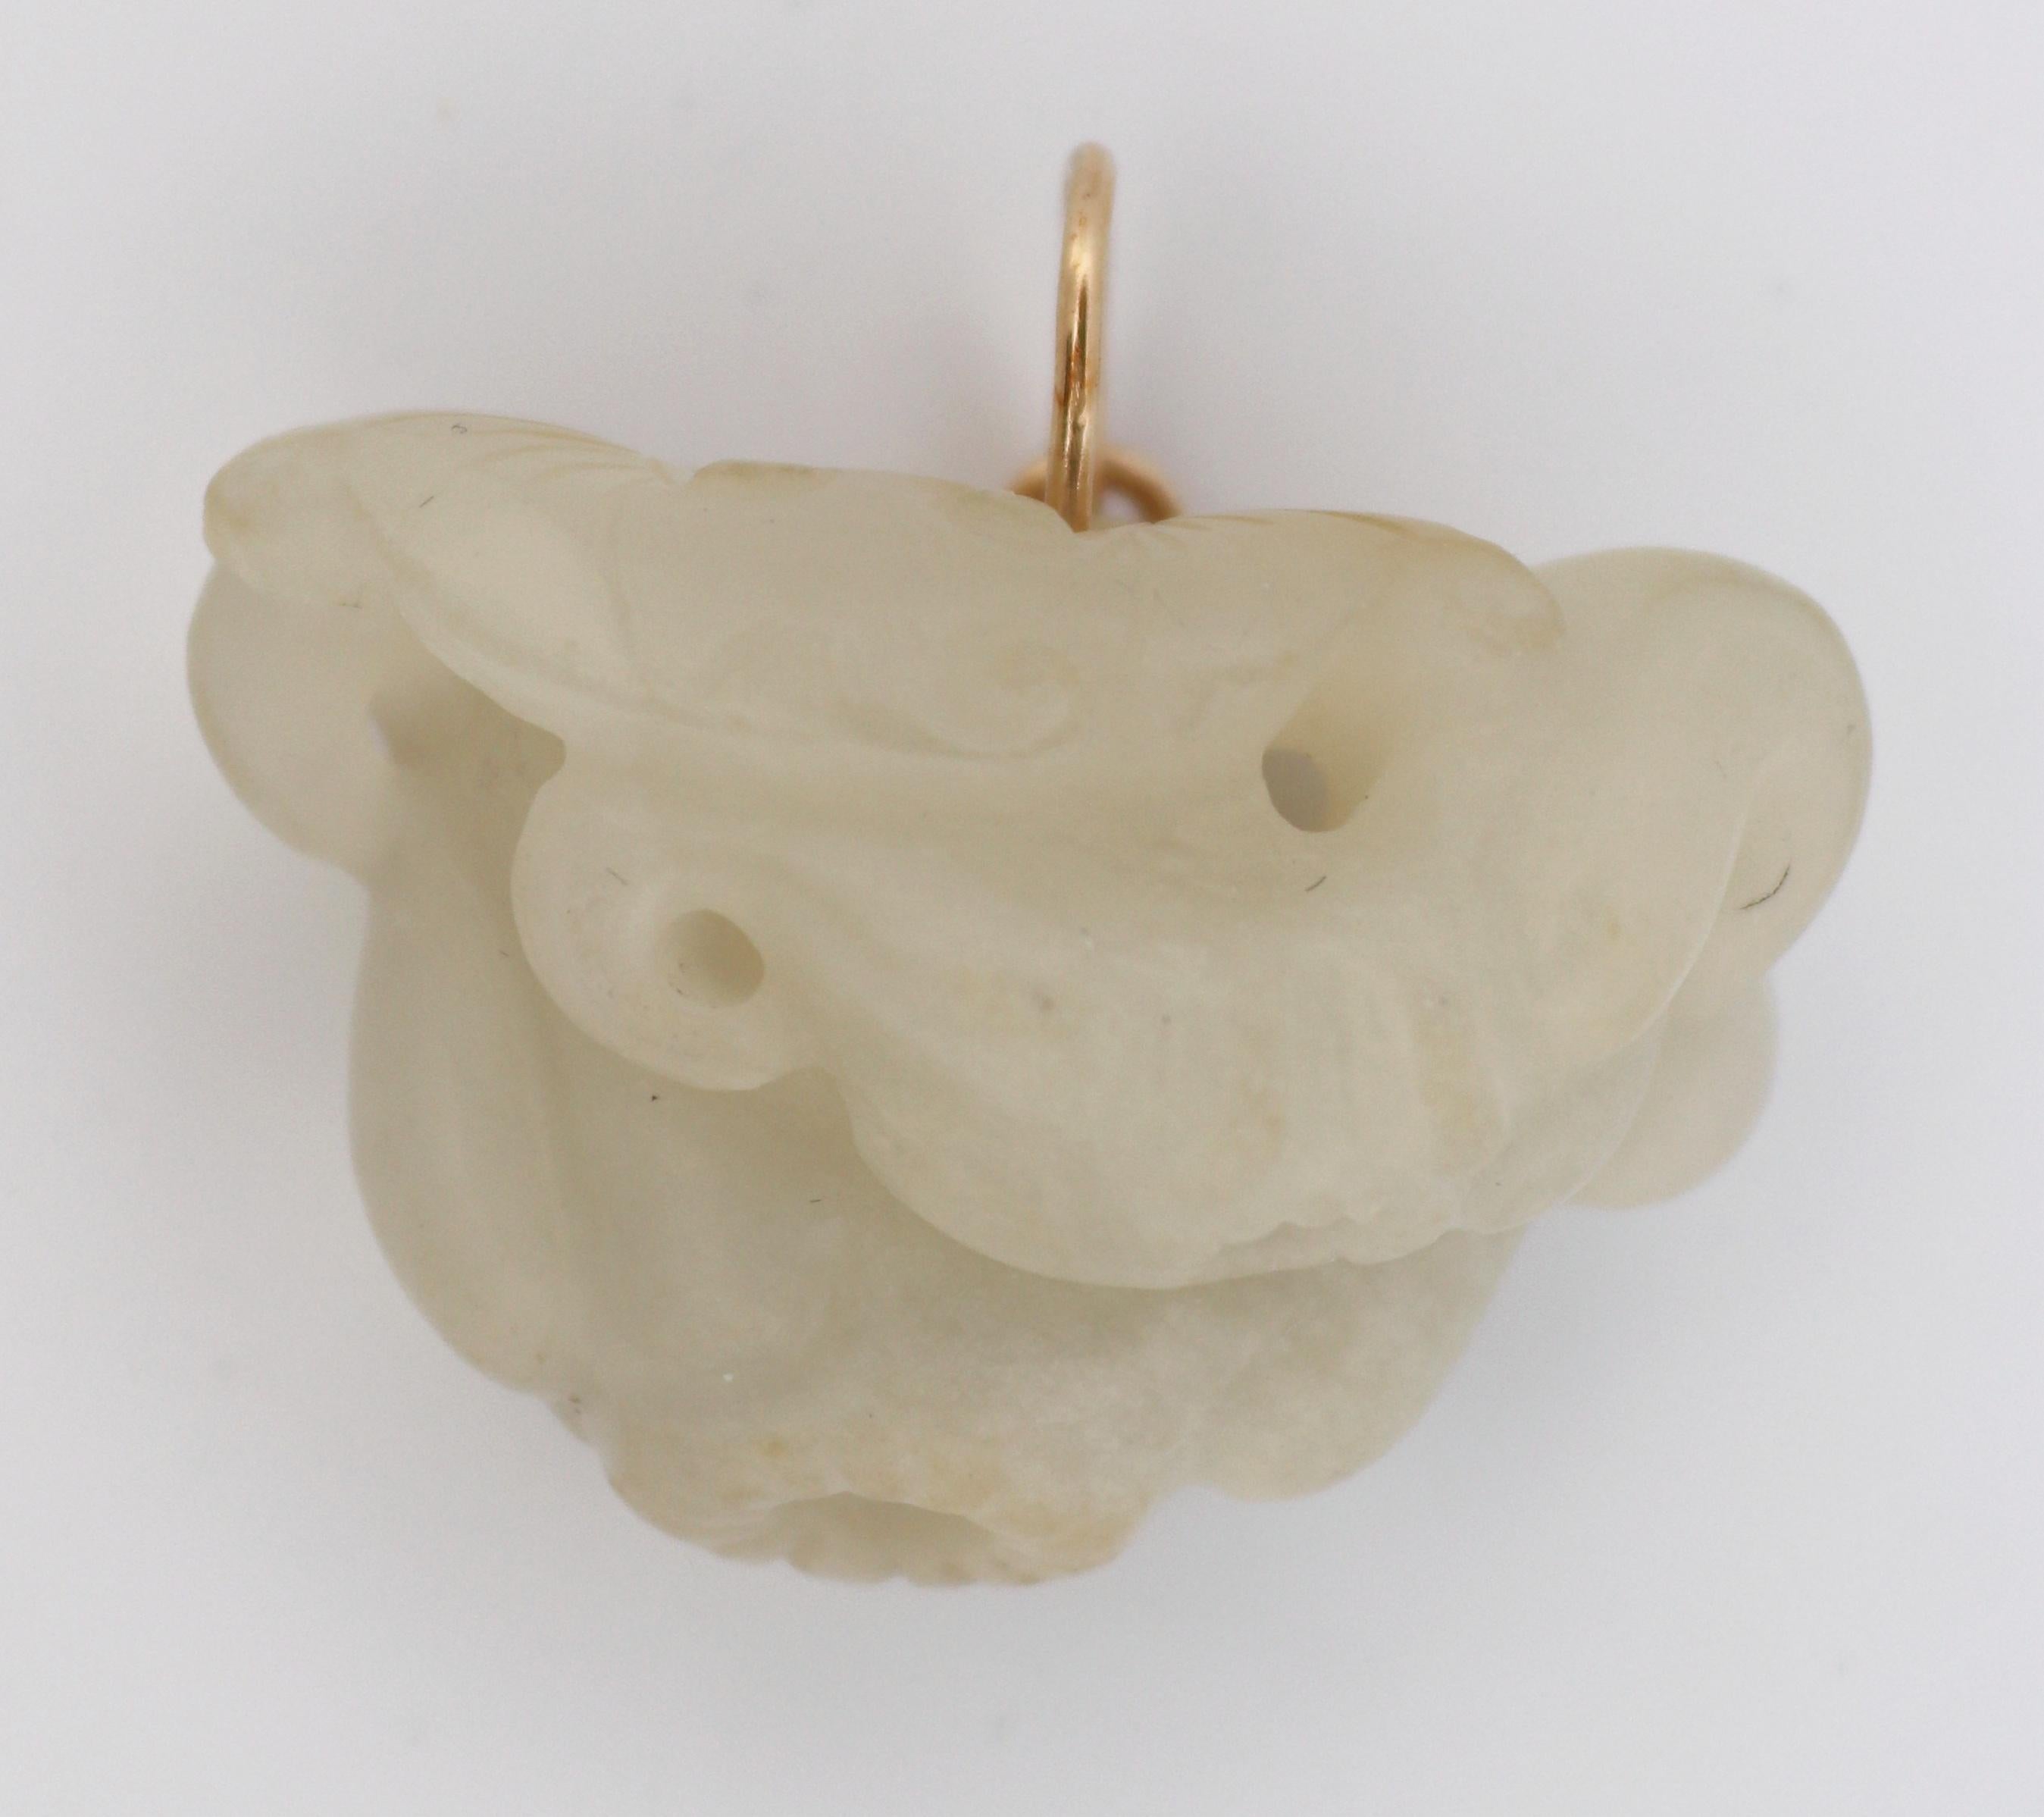 The carved white semi translucent nephrite “Mutton Fat” jade, depicts a bat drinking the nectar from a flower on top of two lotus flowers, completed by a 14k yellow gold wire bail, 30.0 X 16.3 X 20.0 mm, Gross weight 11.33 grams.